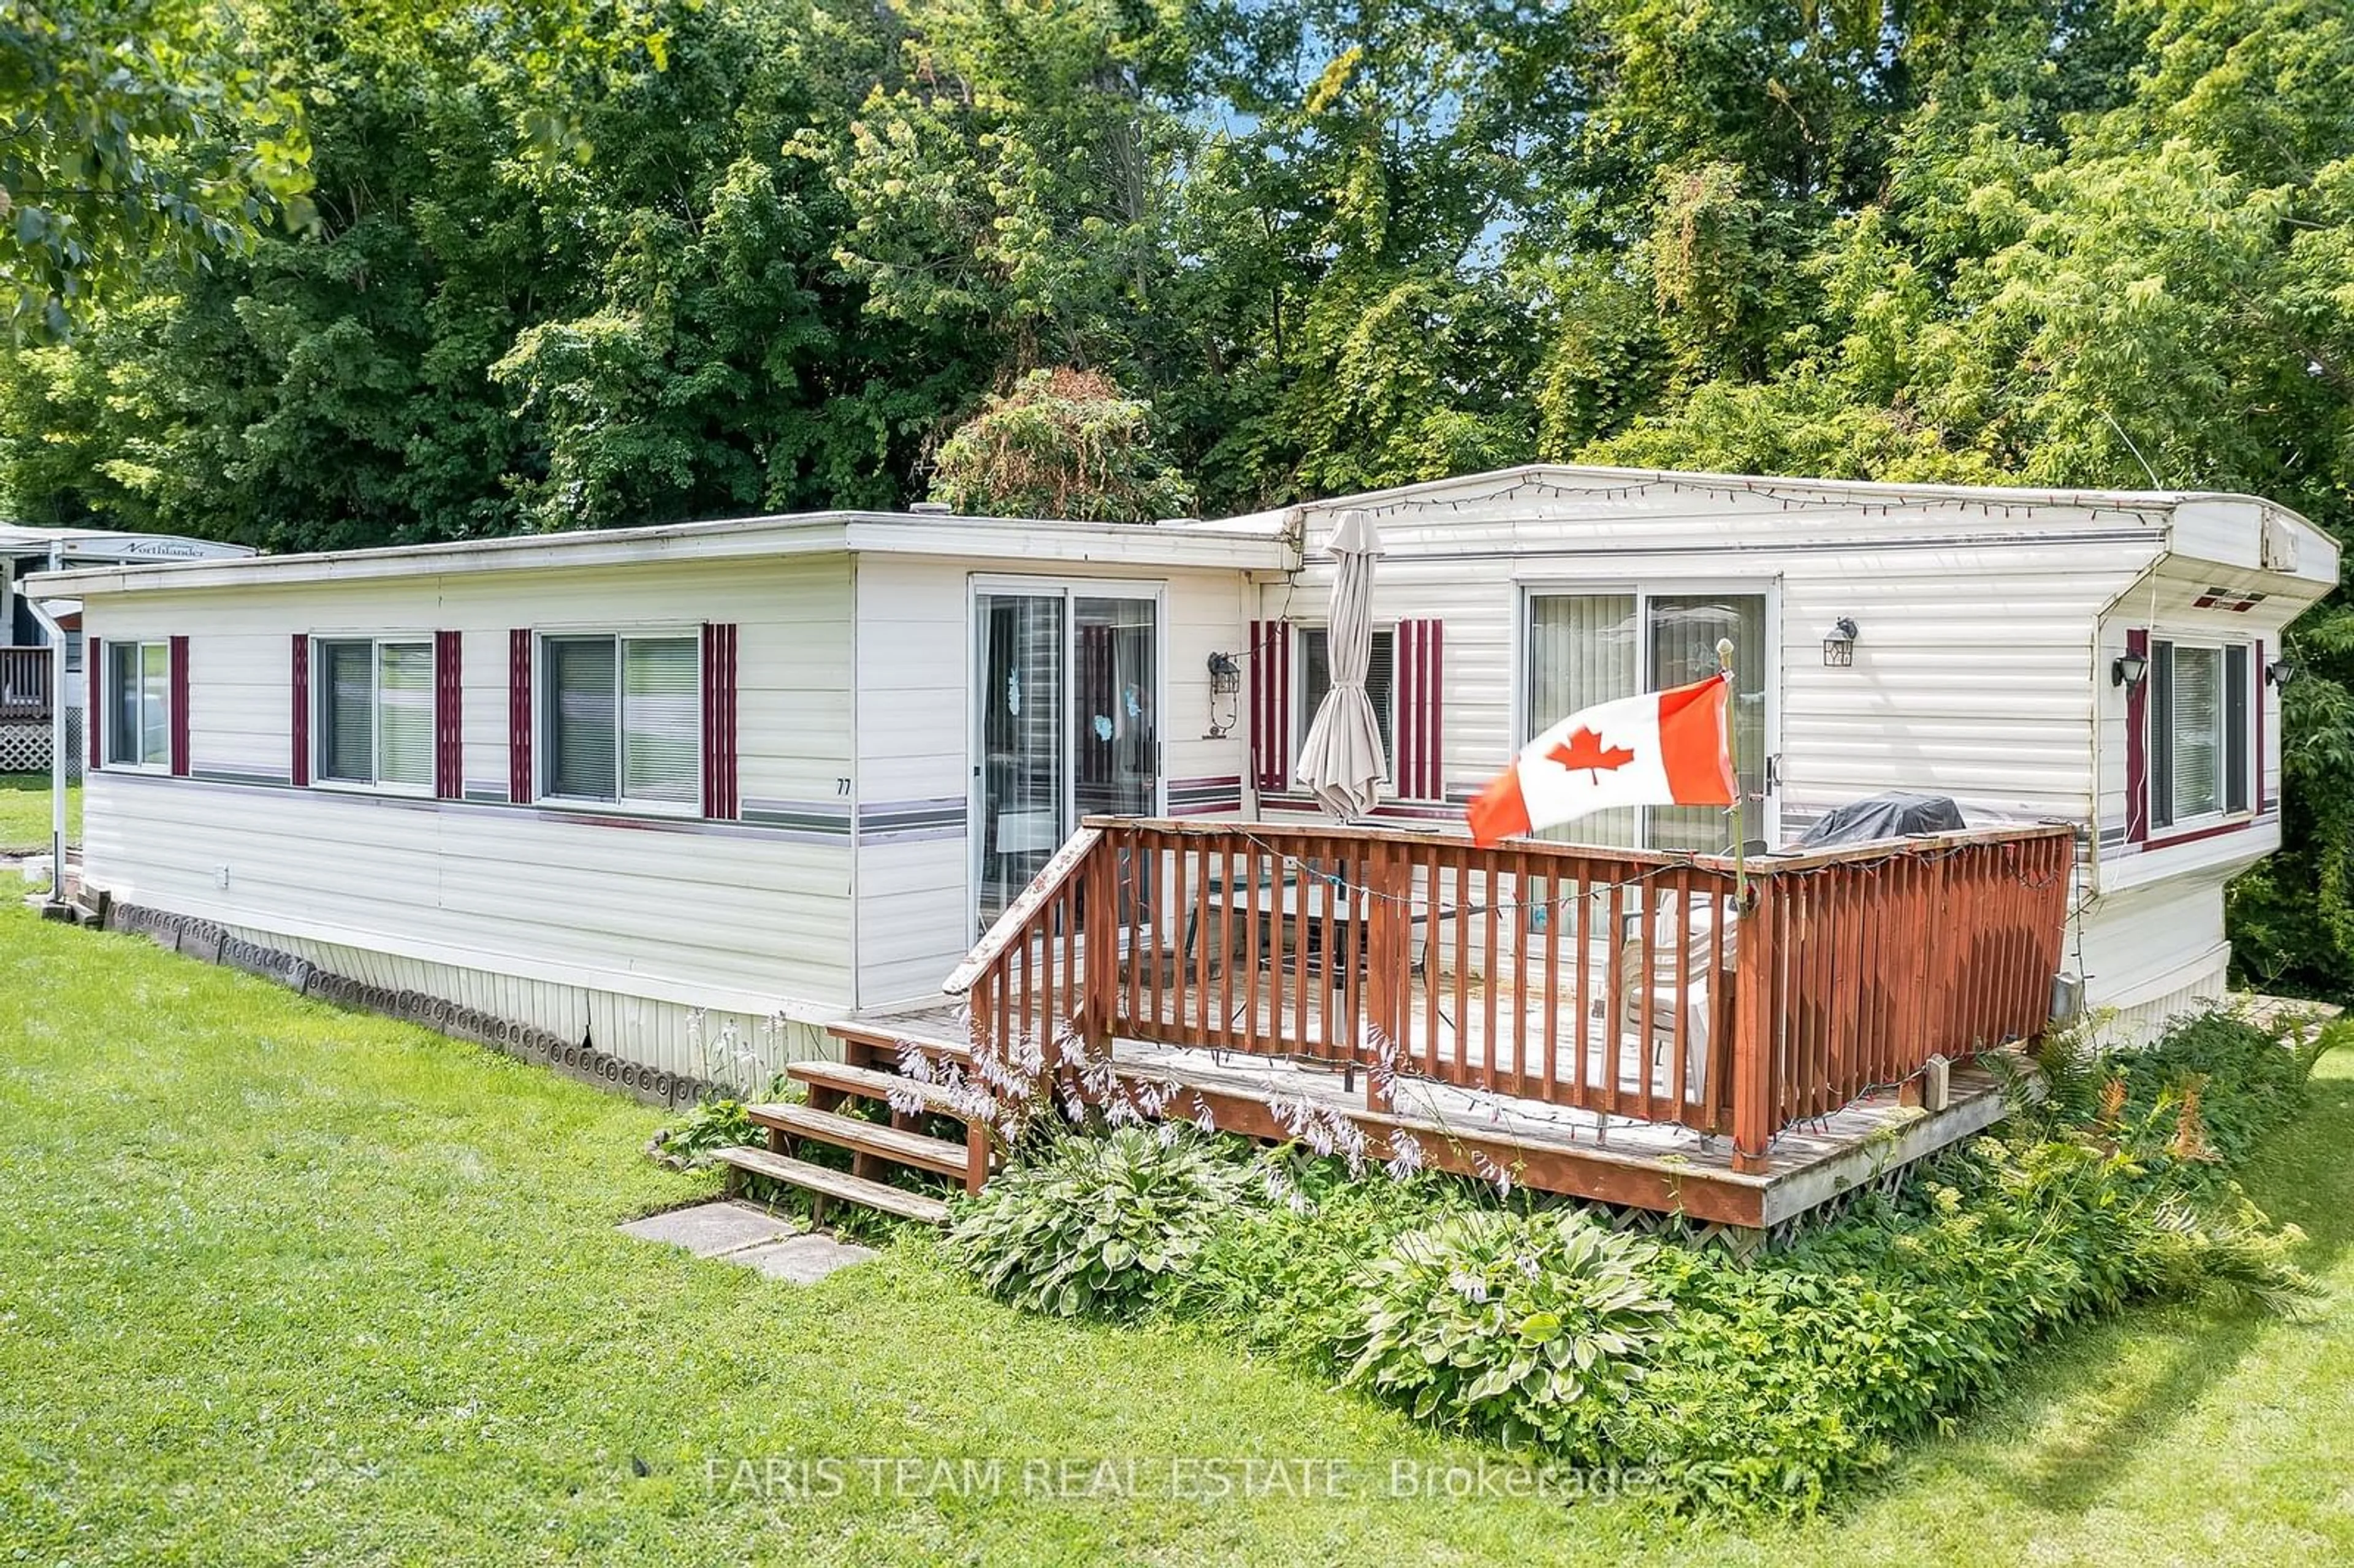 Cottage for 77 Stans Circ, Midland Ontario L4R 0B8